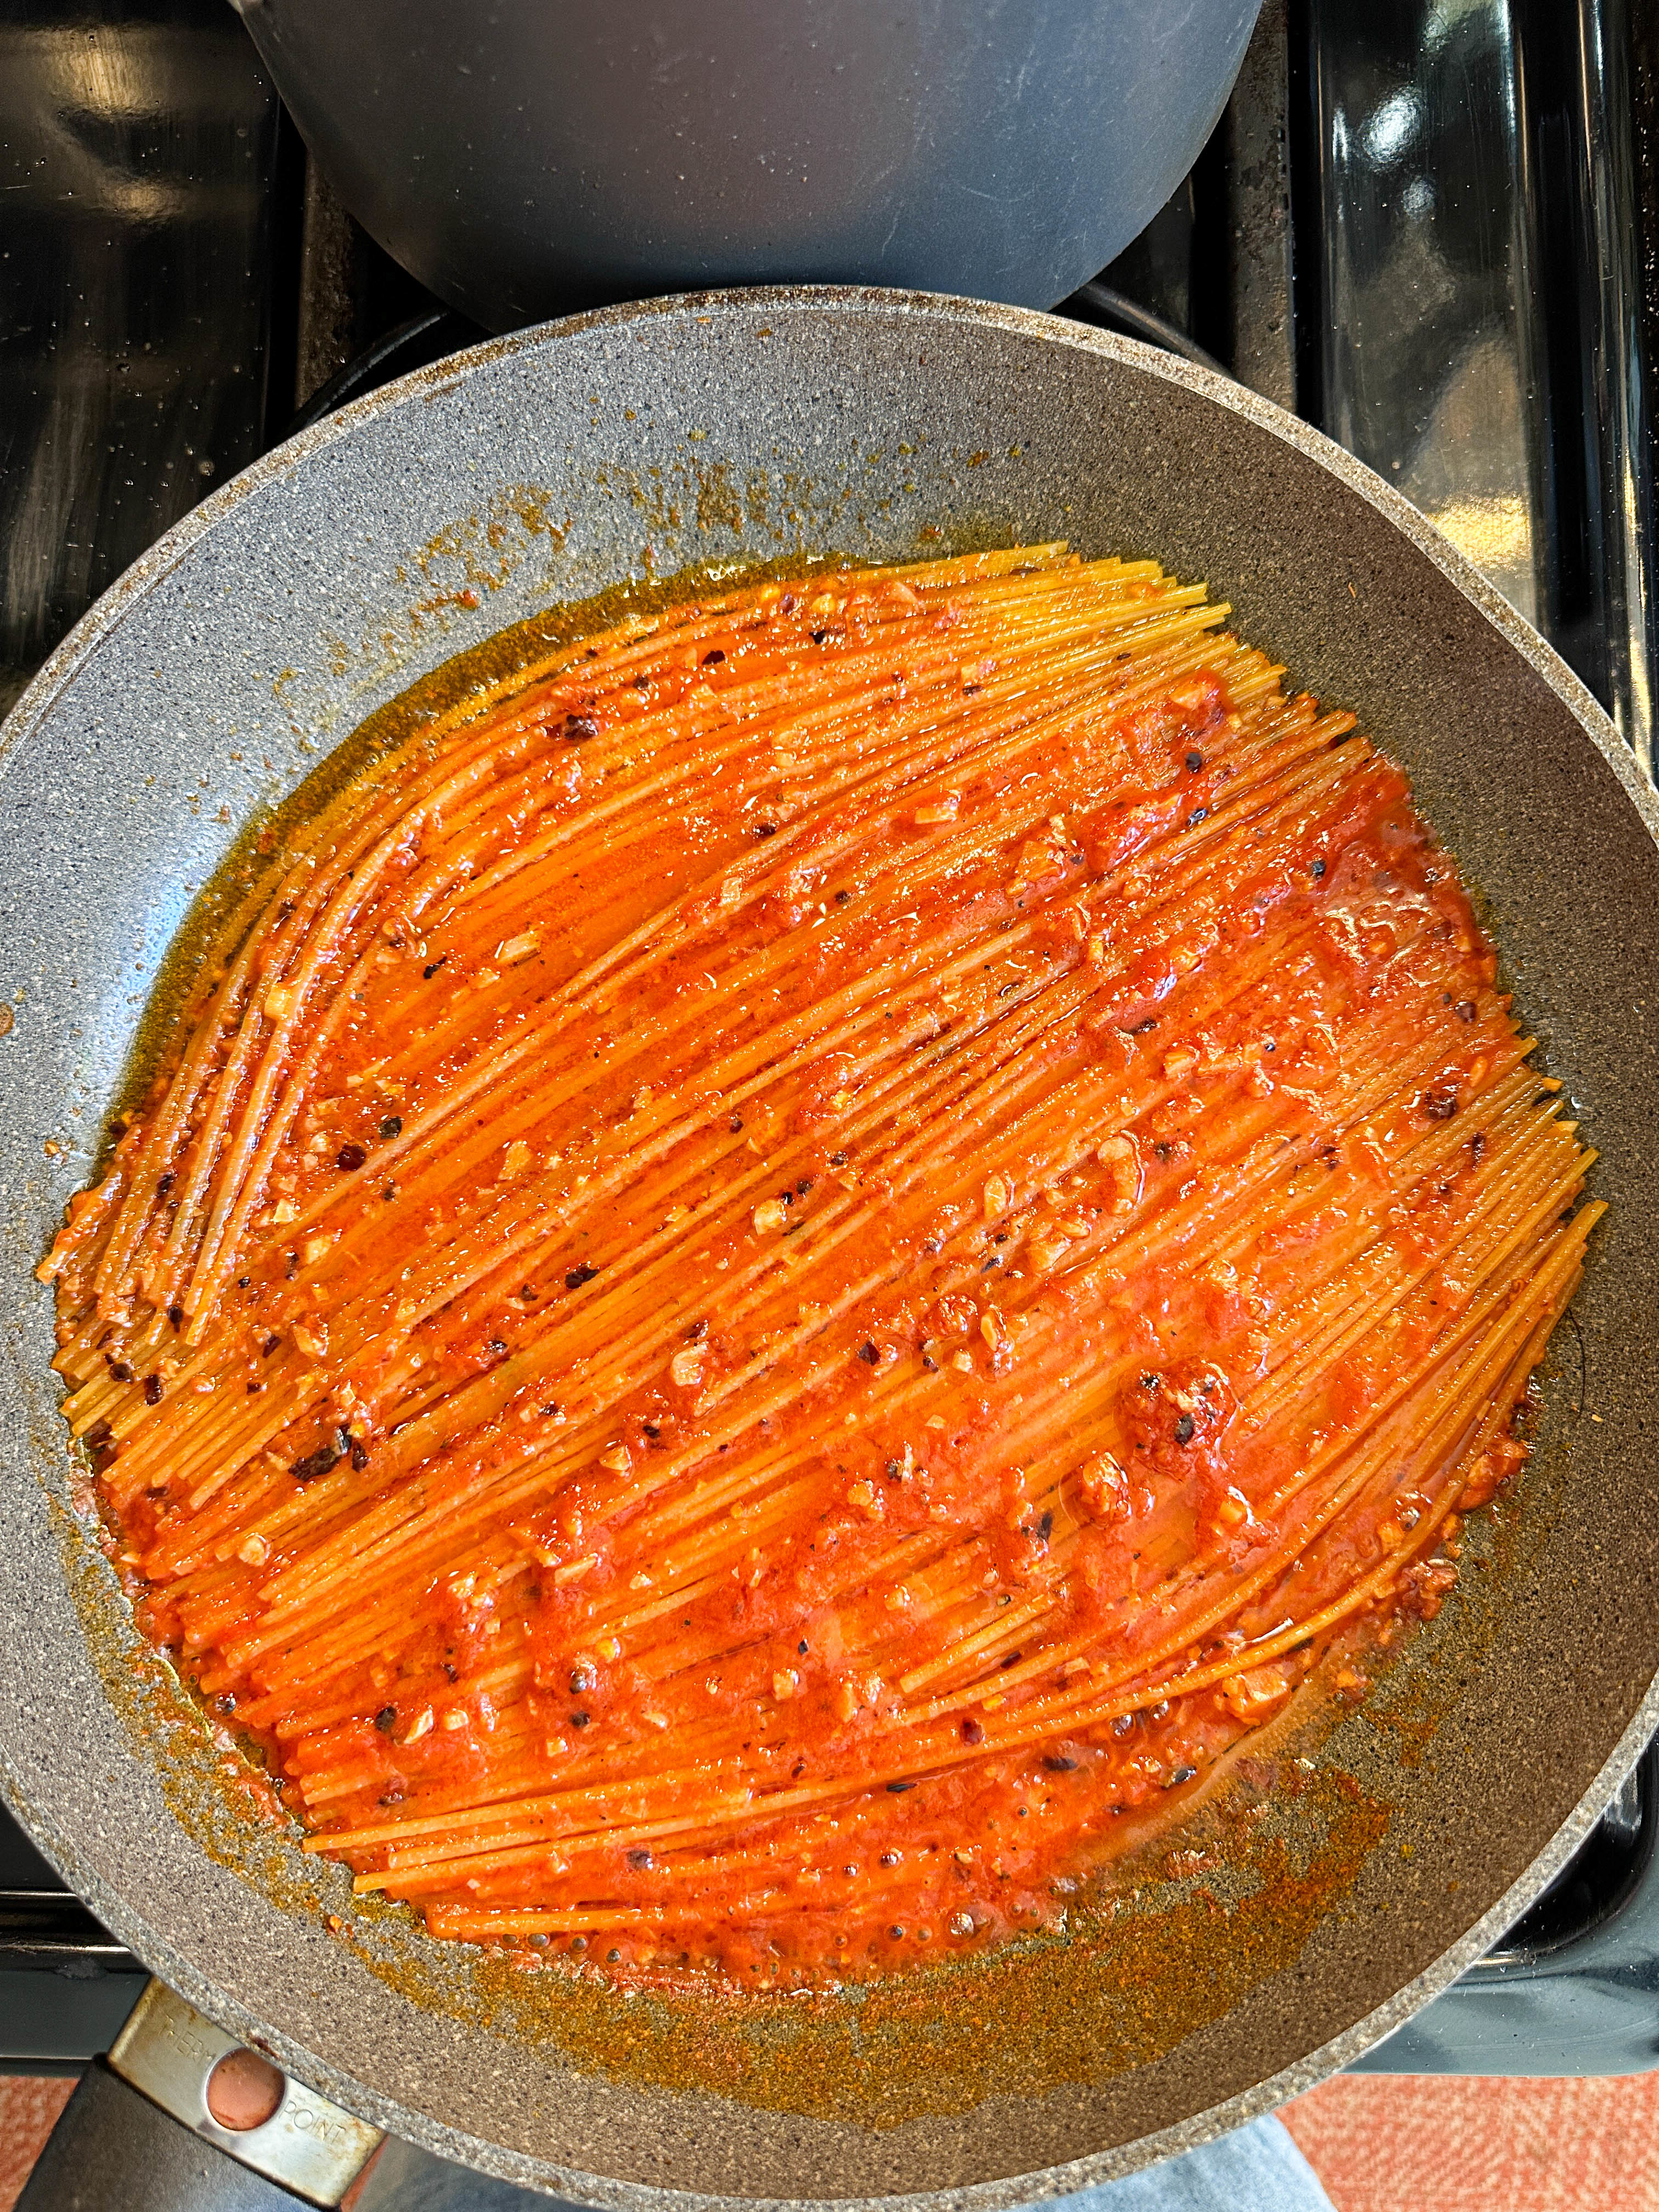 Spaghetti noodles cooking in sauce in a pan